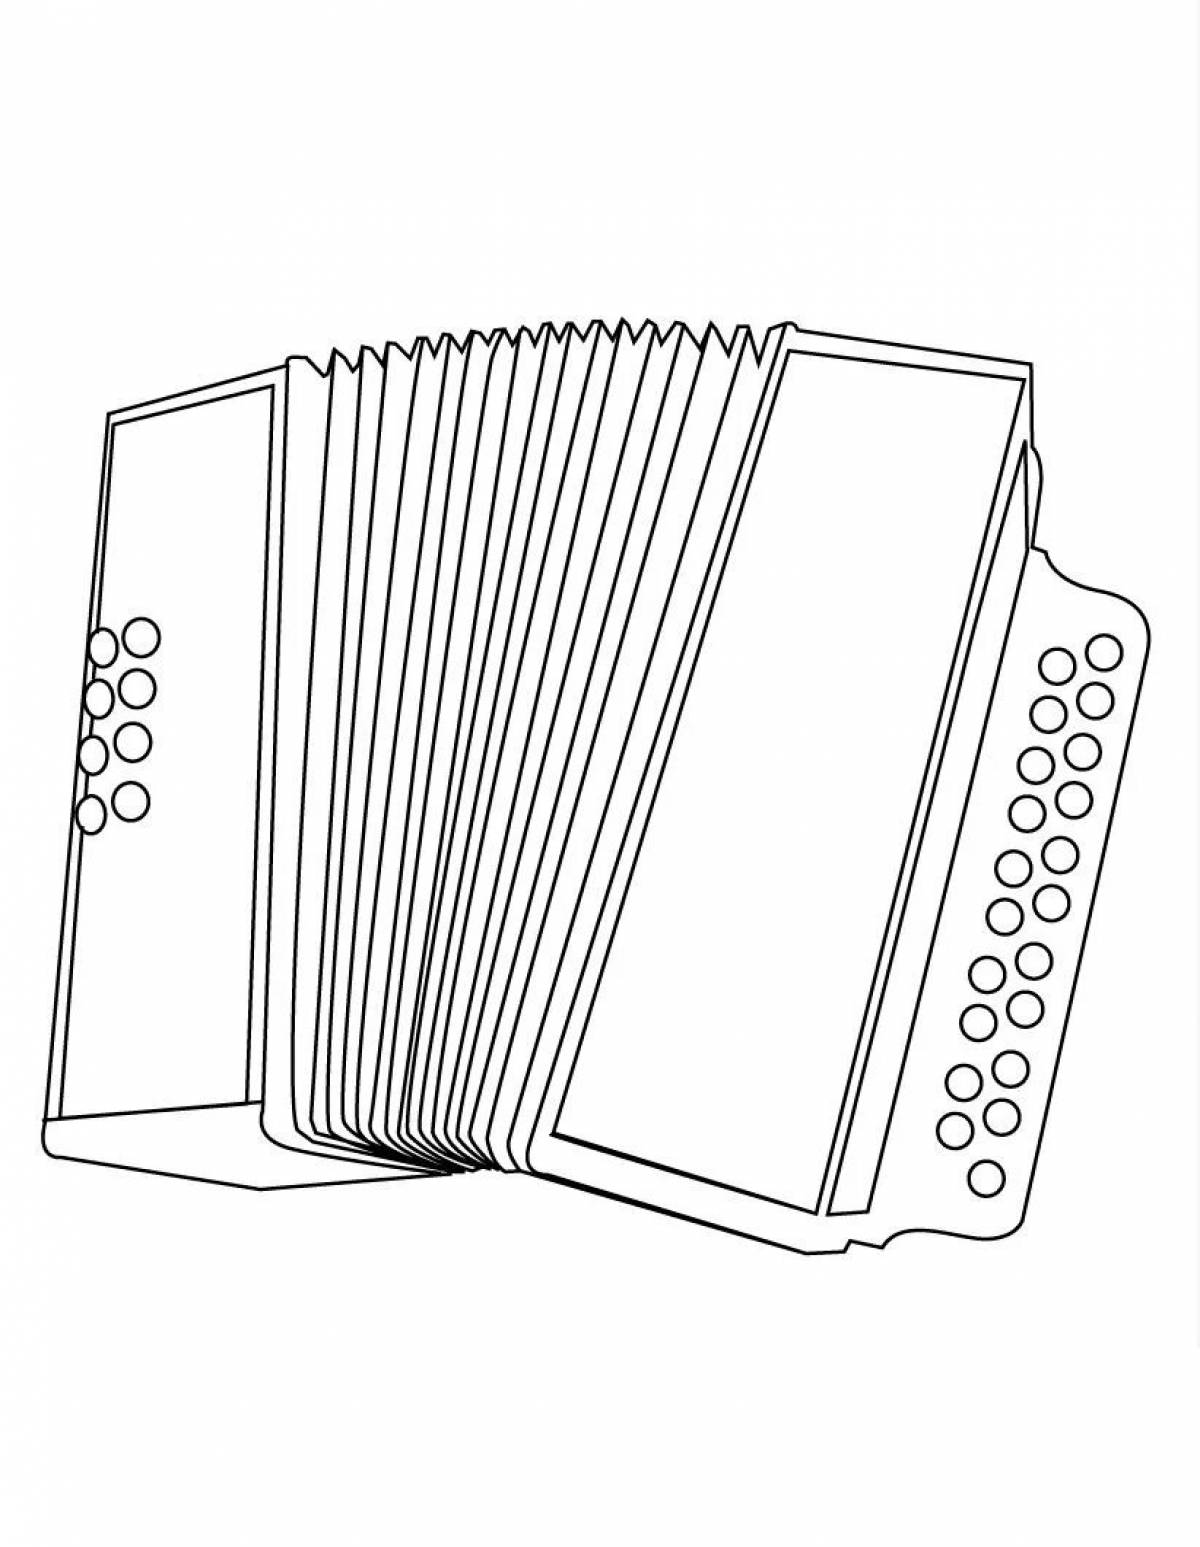 Inviting accordion coloring book for kids